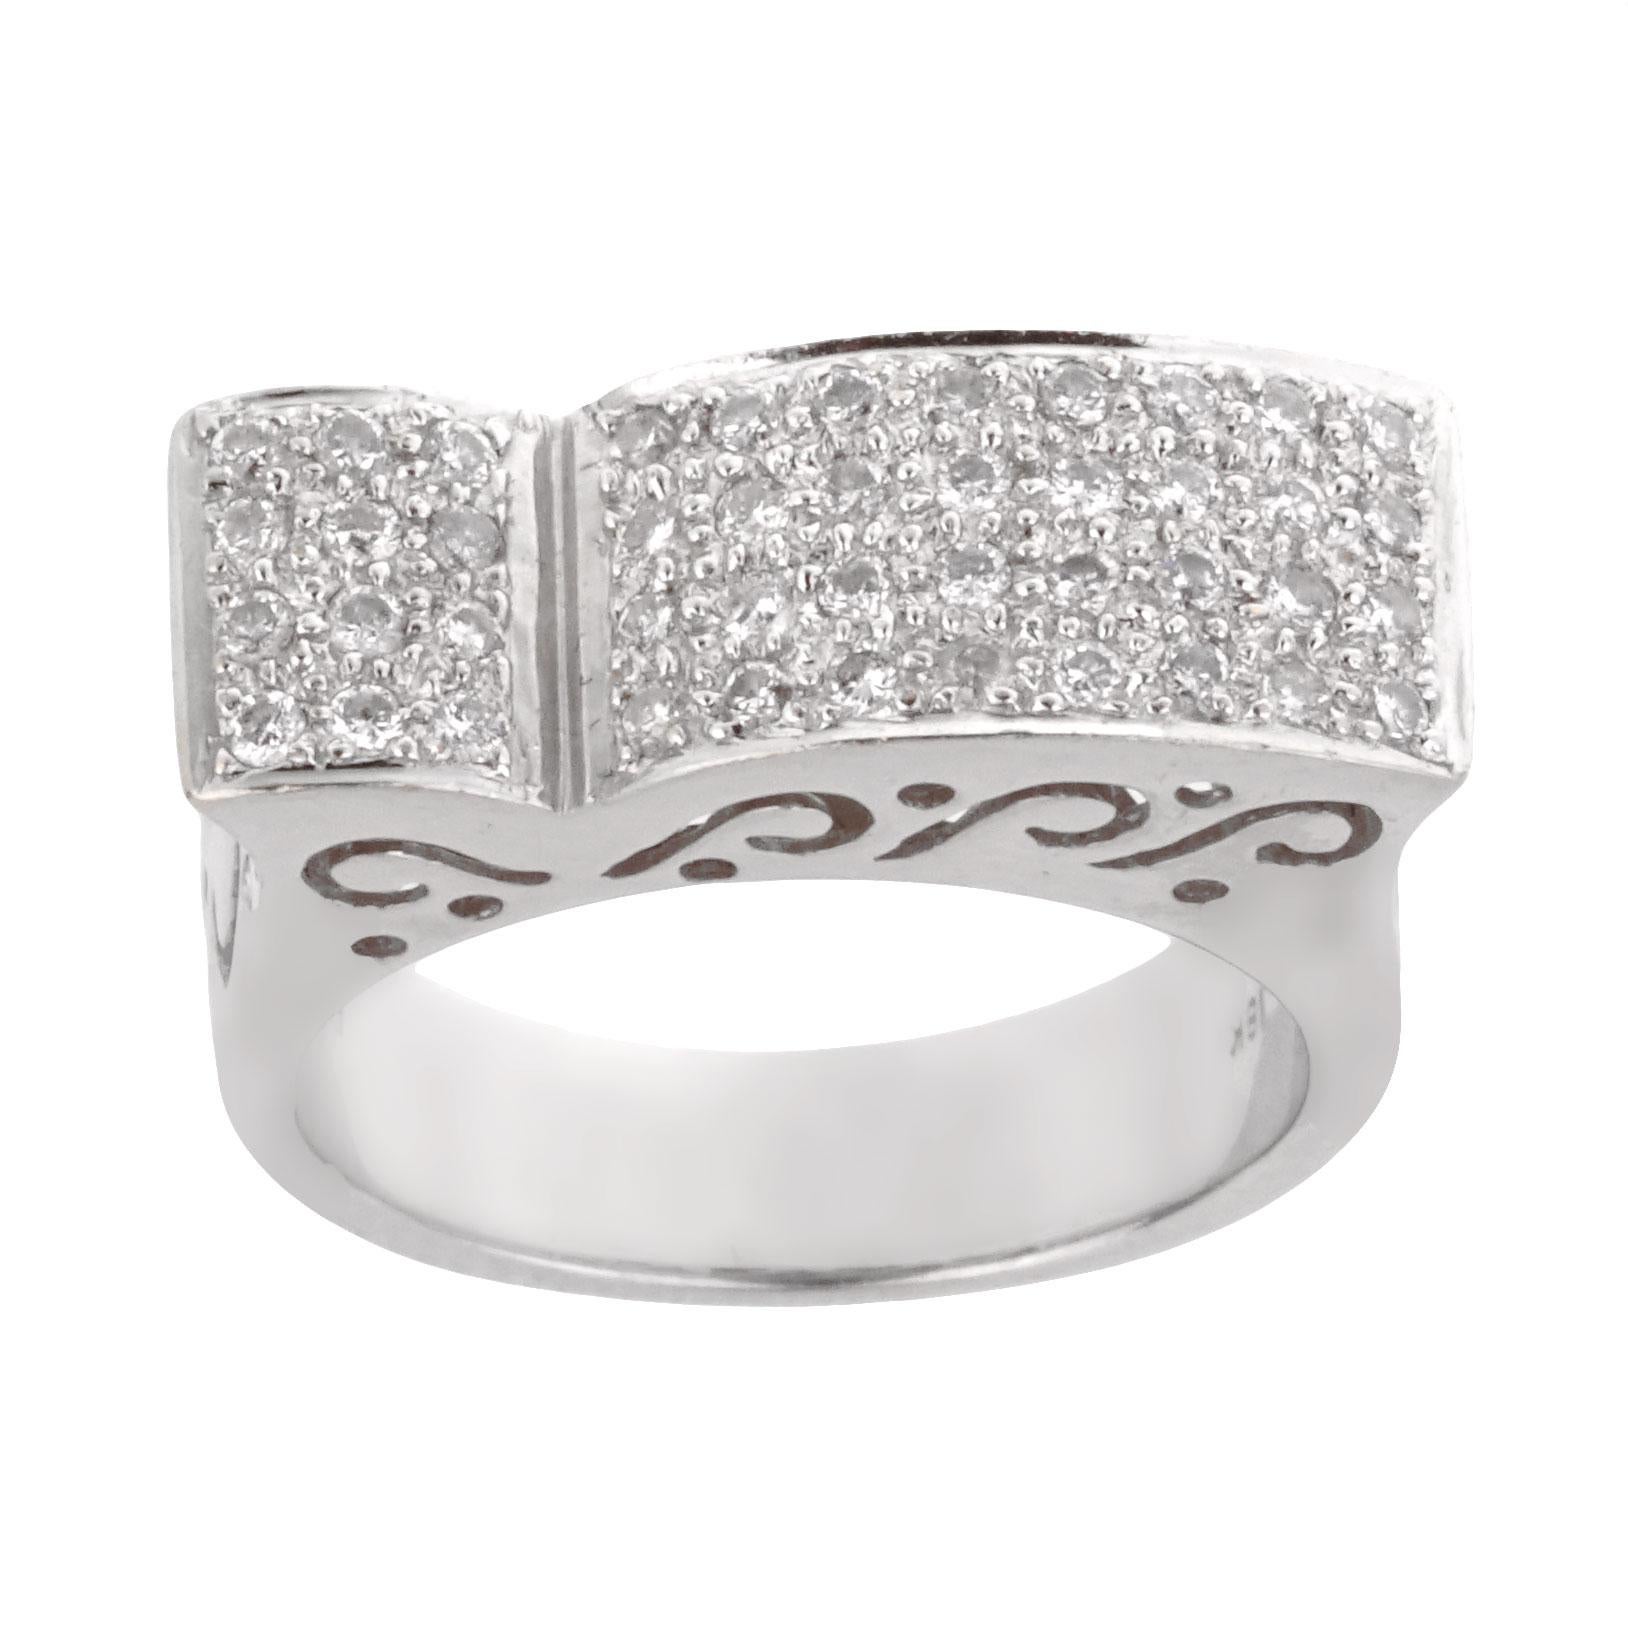 A chic cocktail ring showcasing 3 rows of round brilliant cut diamonds in 18k white gold. The ring has a total of .50ct and is a size 6 3/4 and can be resized.